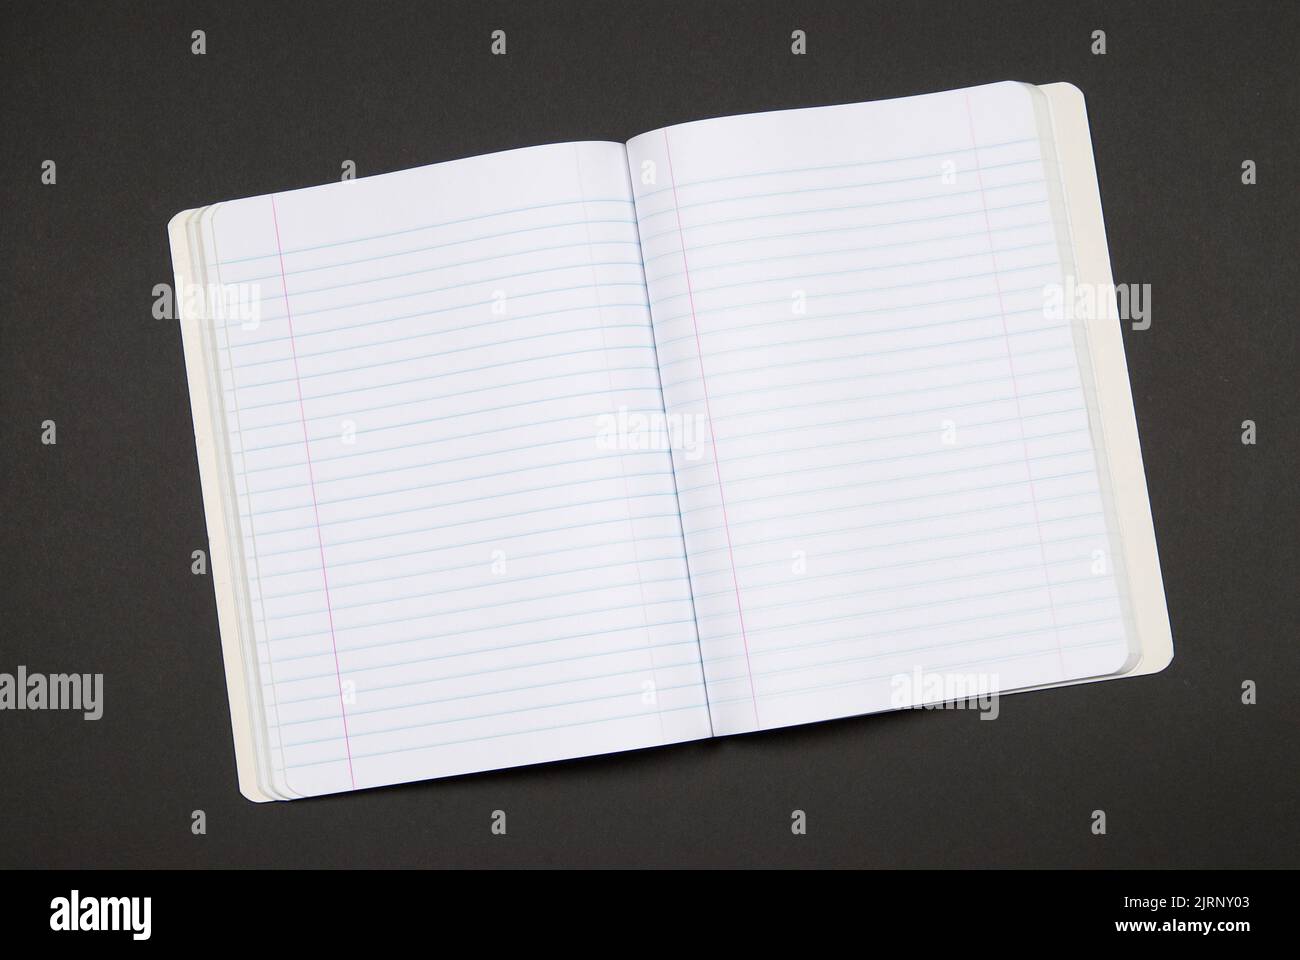 Opened journal book showing plain lined pages. On black for easy isolation Stock Photo